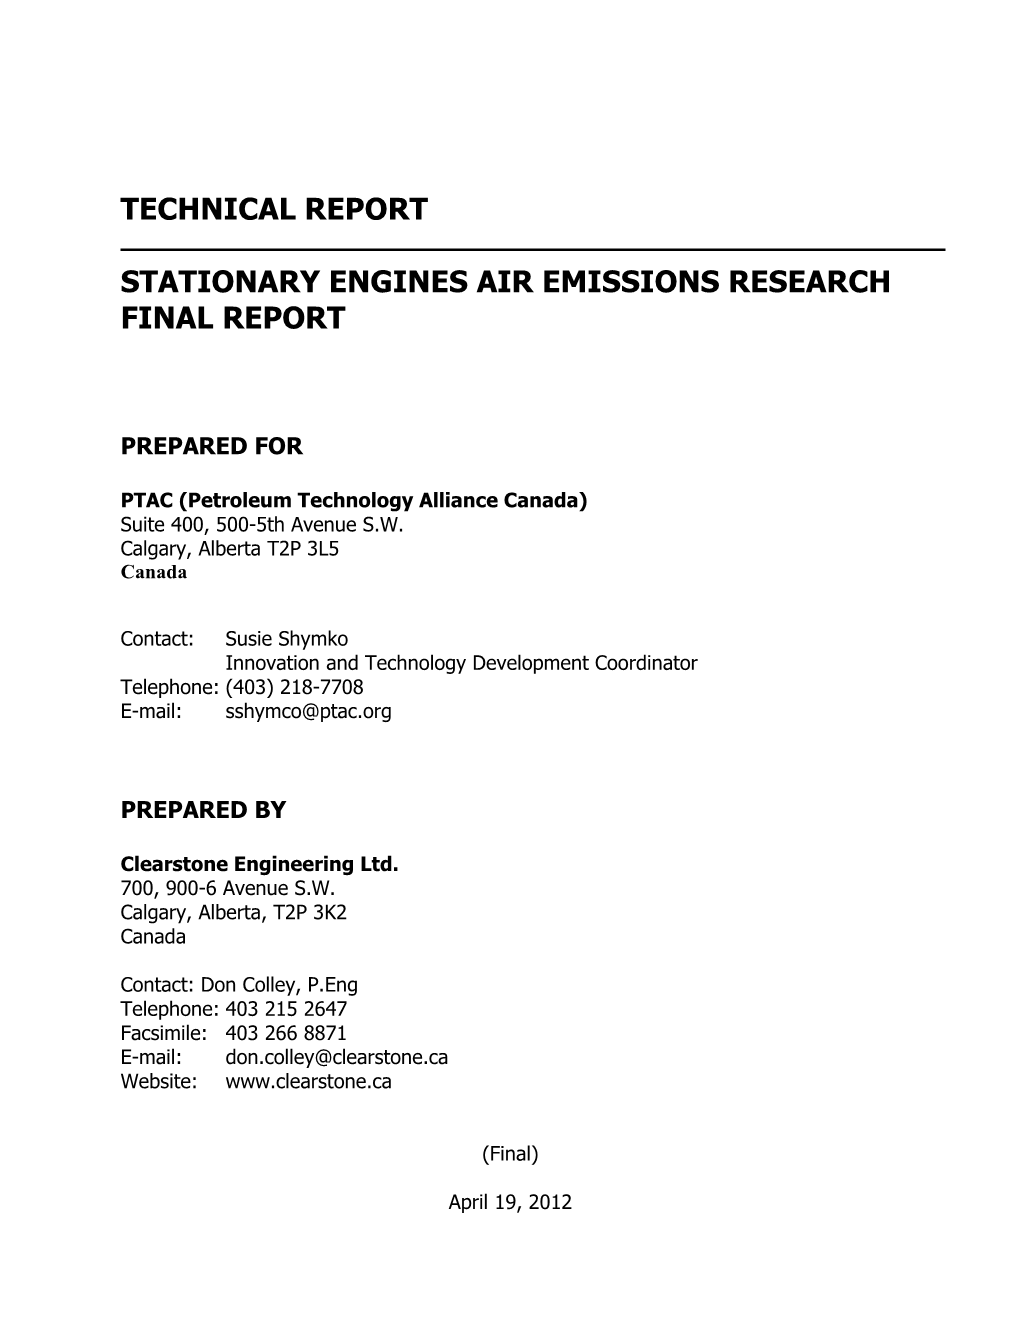 Technical Report Stationary Engines Air Emissions